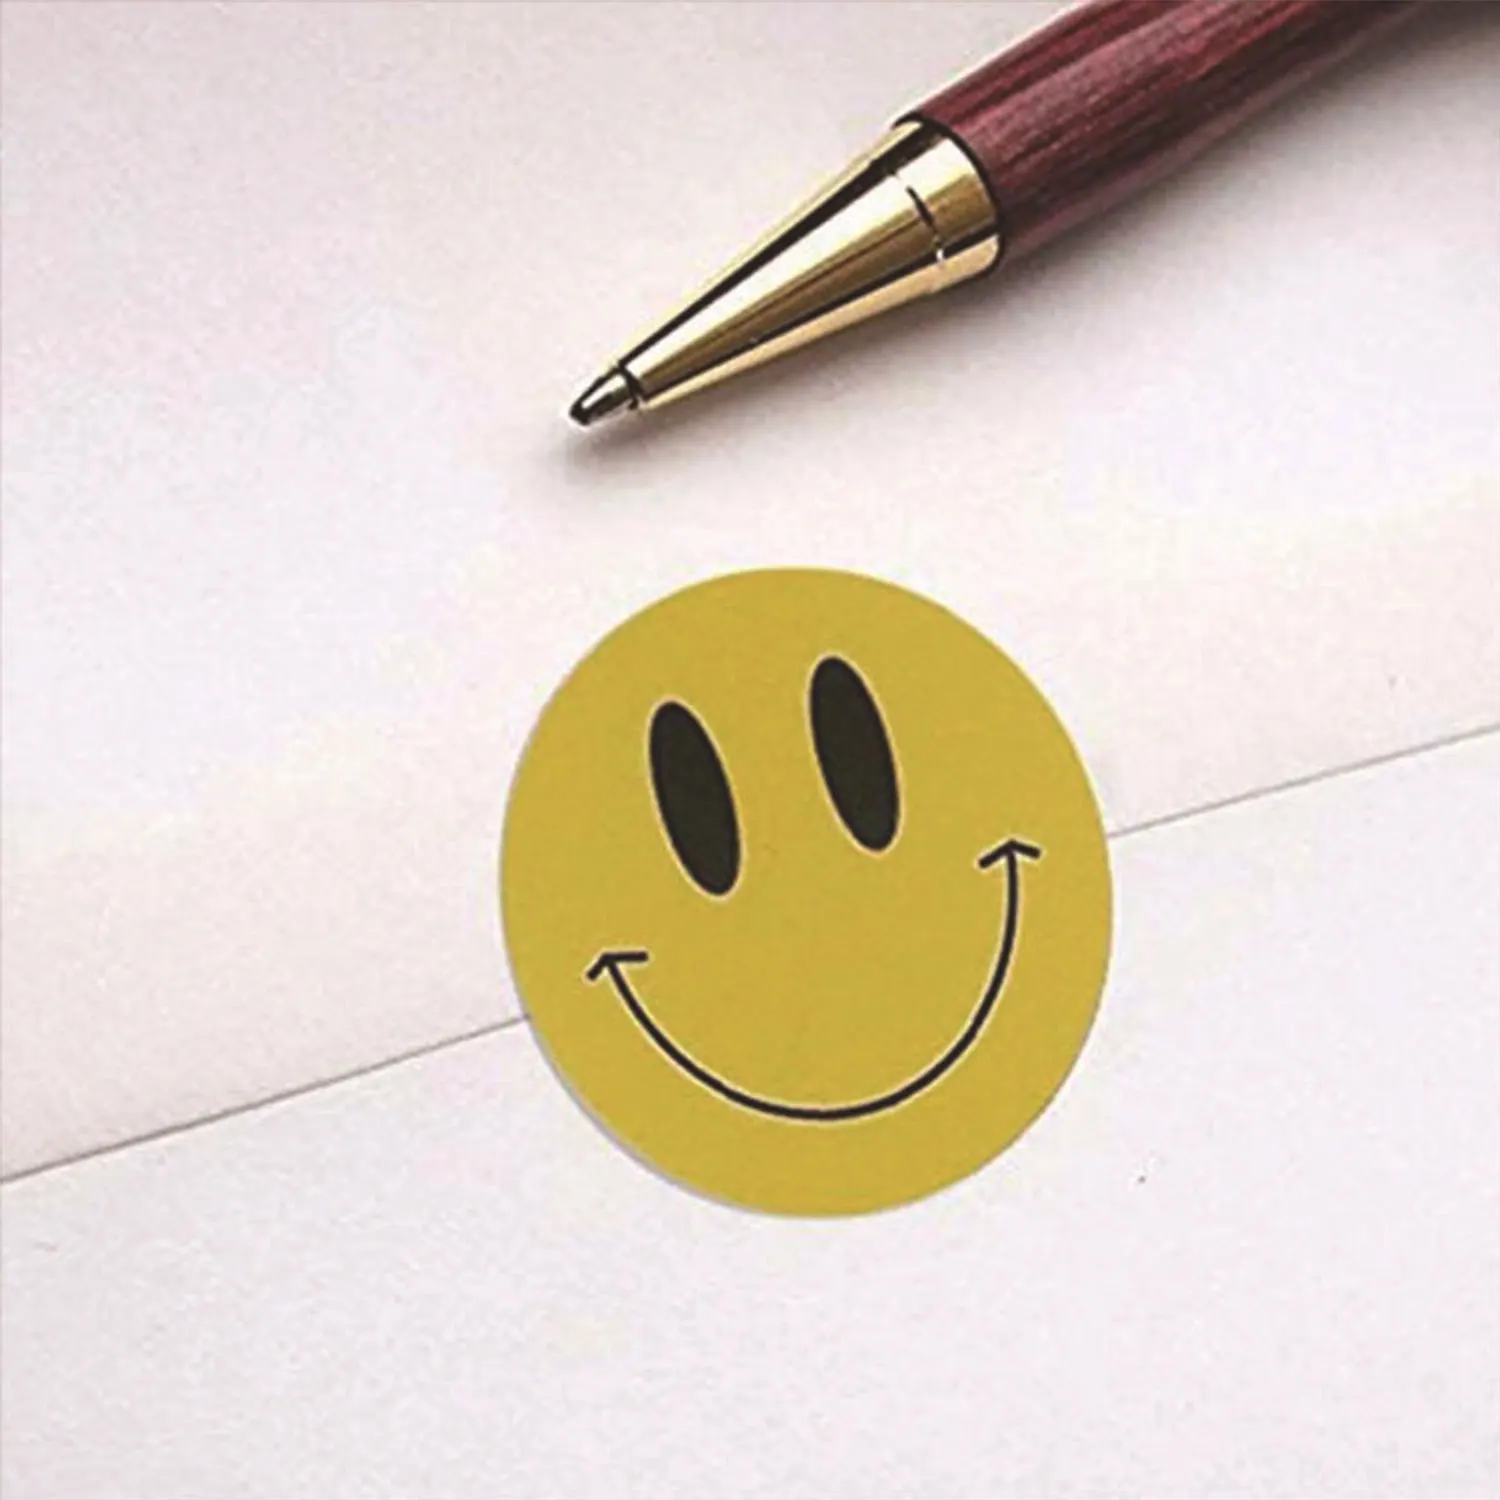 

500 Pcs/roll Smiley Face Sticker for Kids Reward Sticker Yellow Dots Labels Happy Smile Face Expression Sticker Label Gift